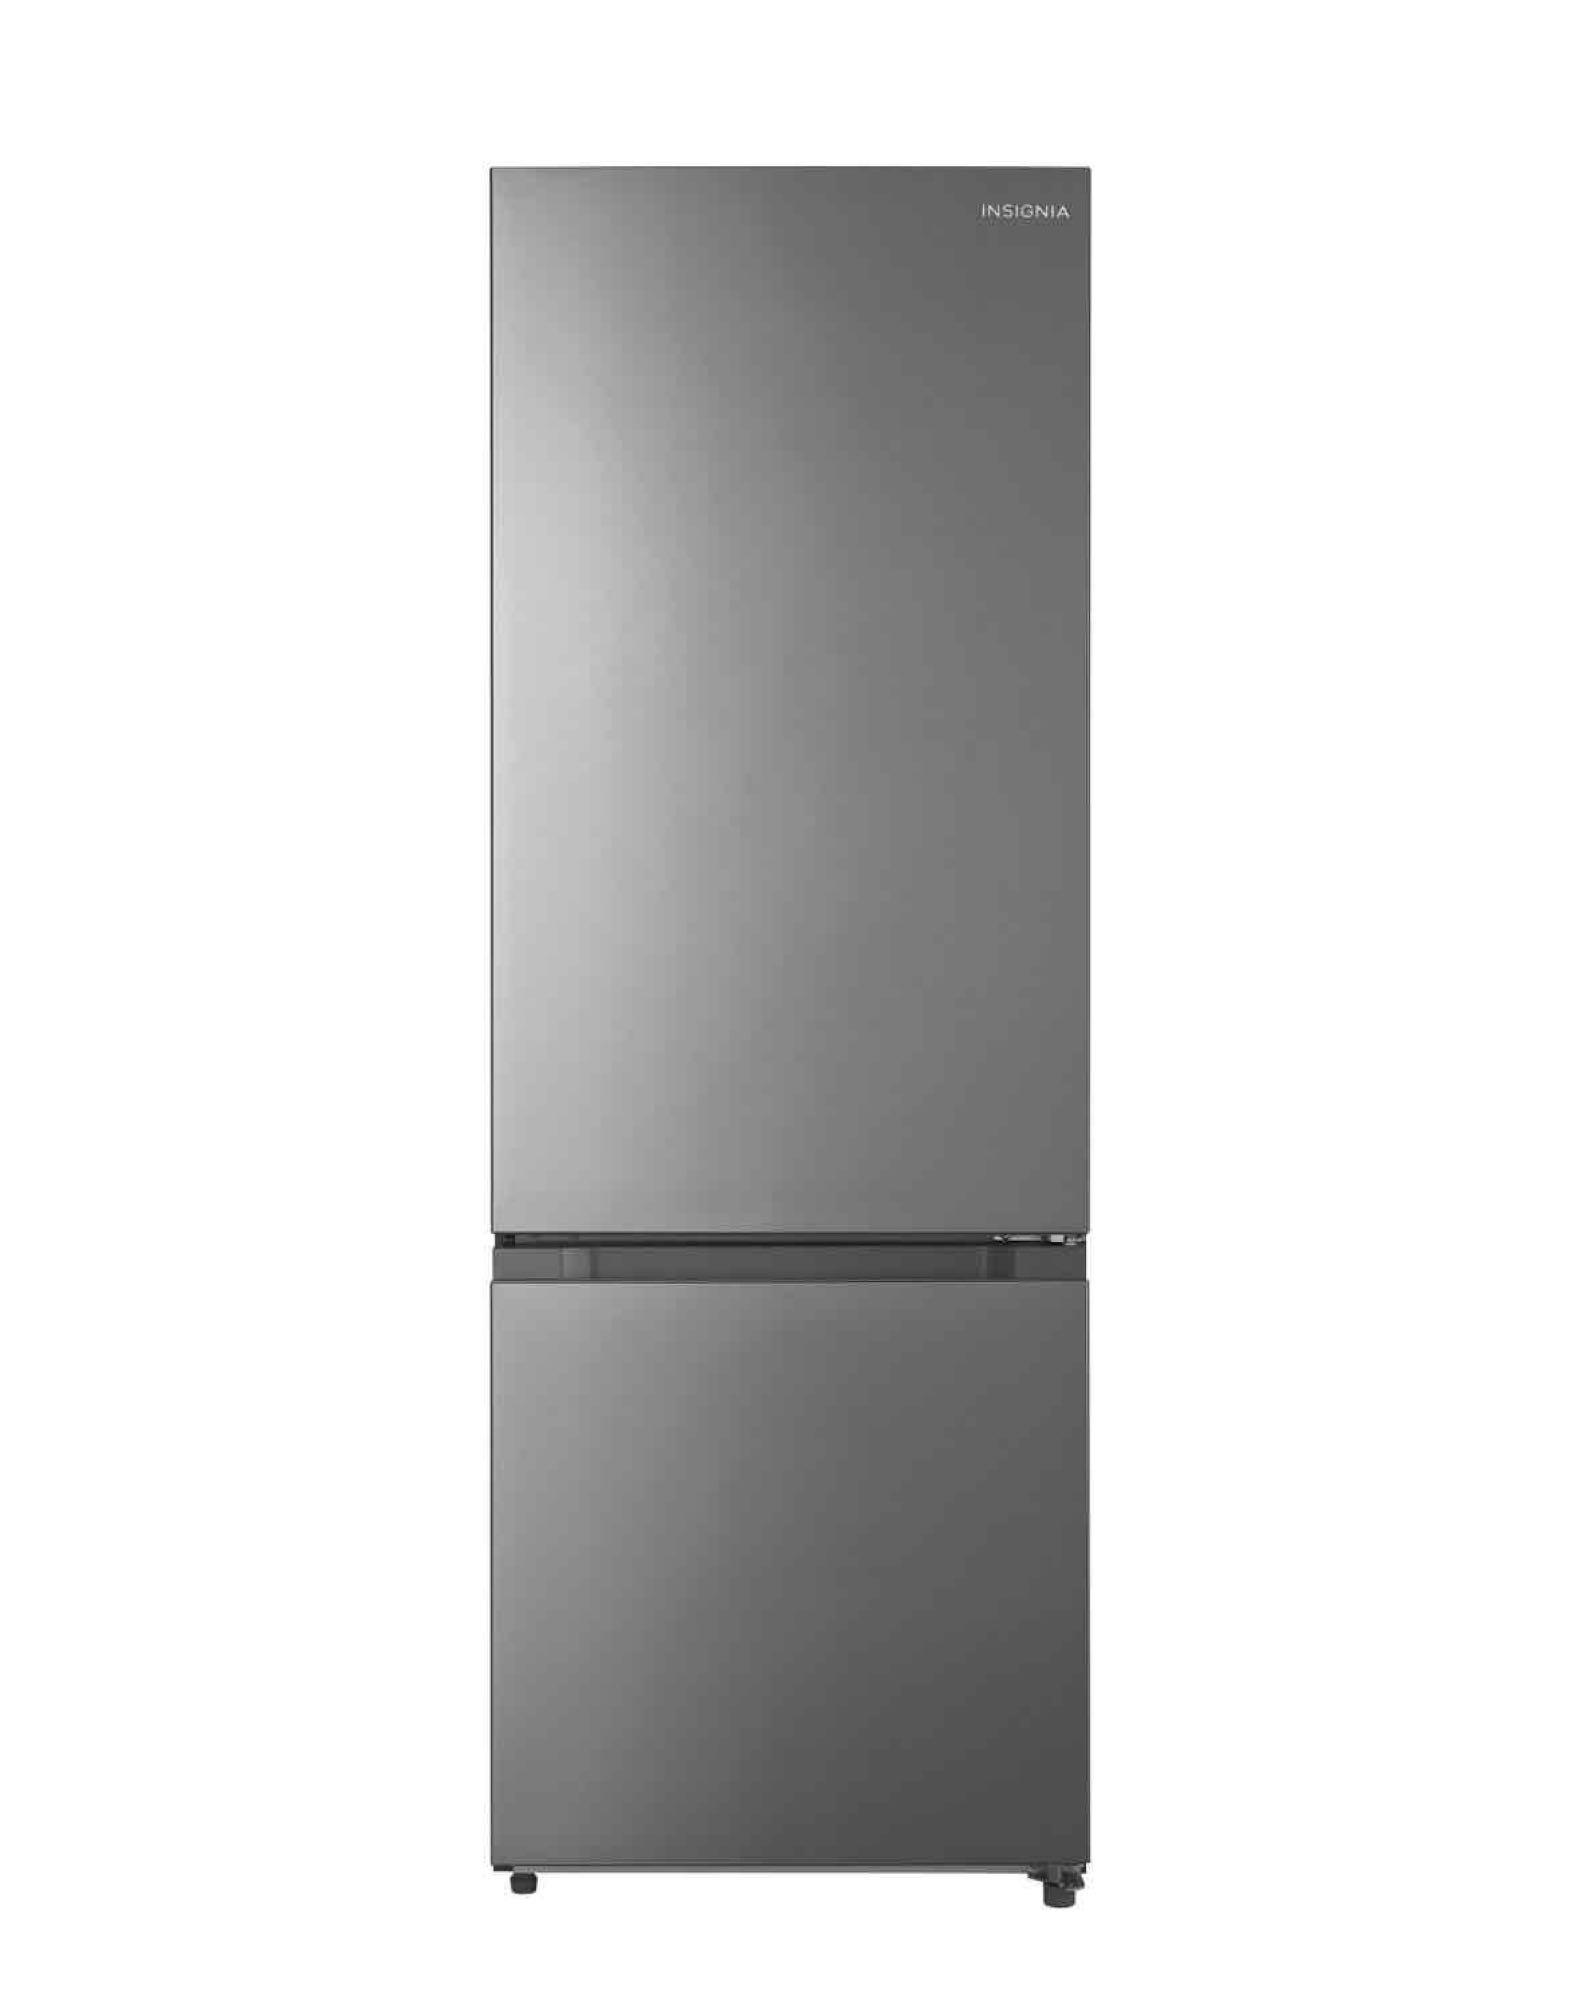 Insignia - 11.5 Cu. Ft. Bottom Mount Refrigerator with ENERGY STAR Certification - Stainless Steel